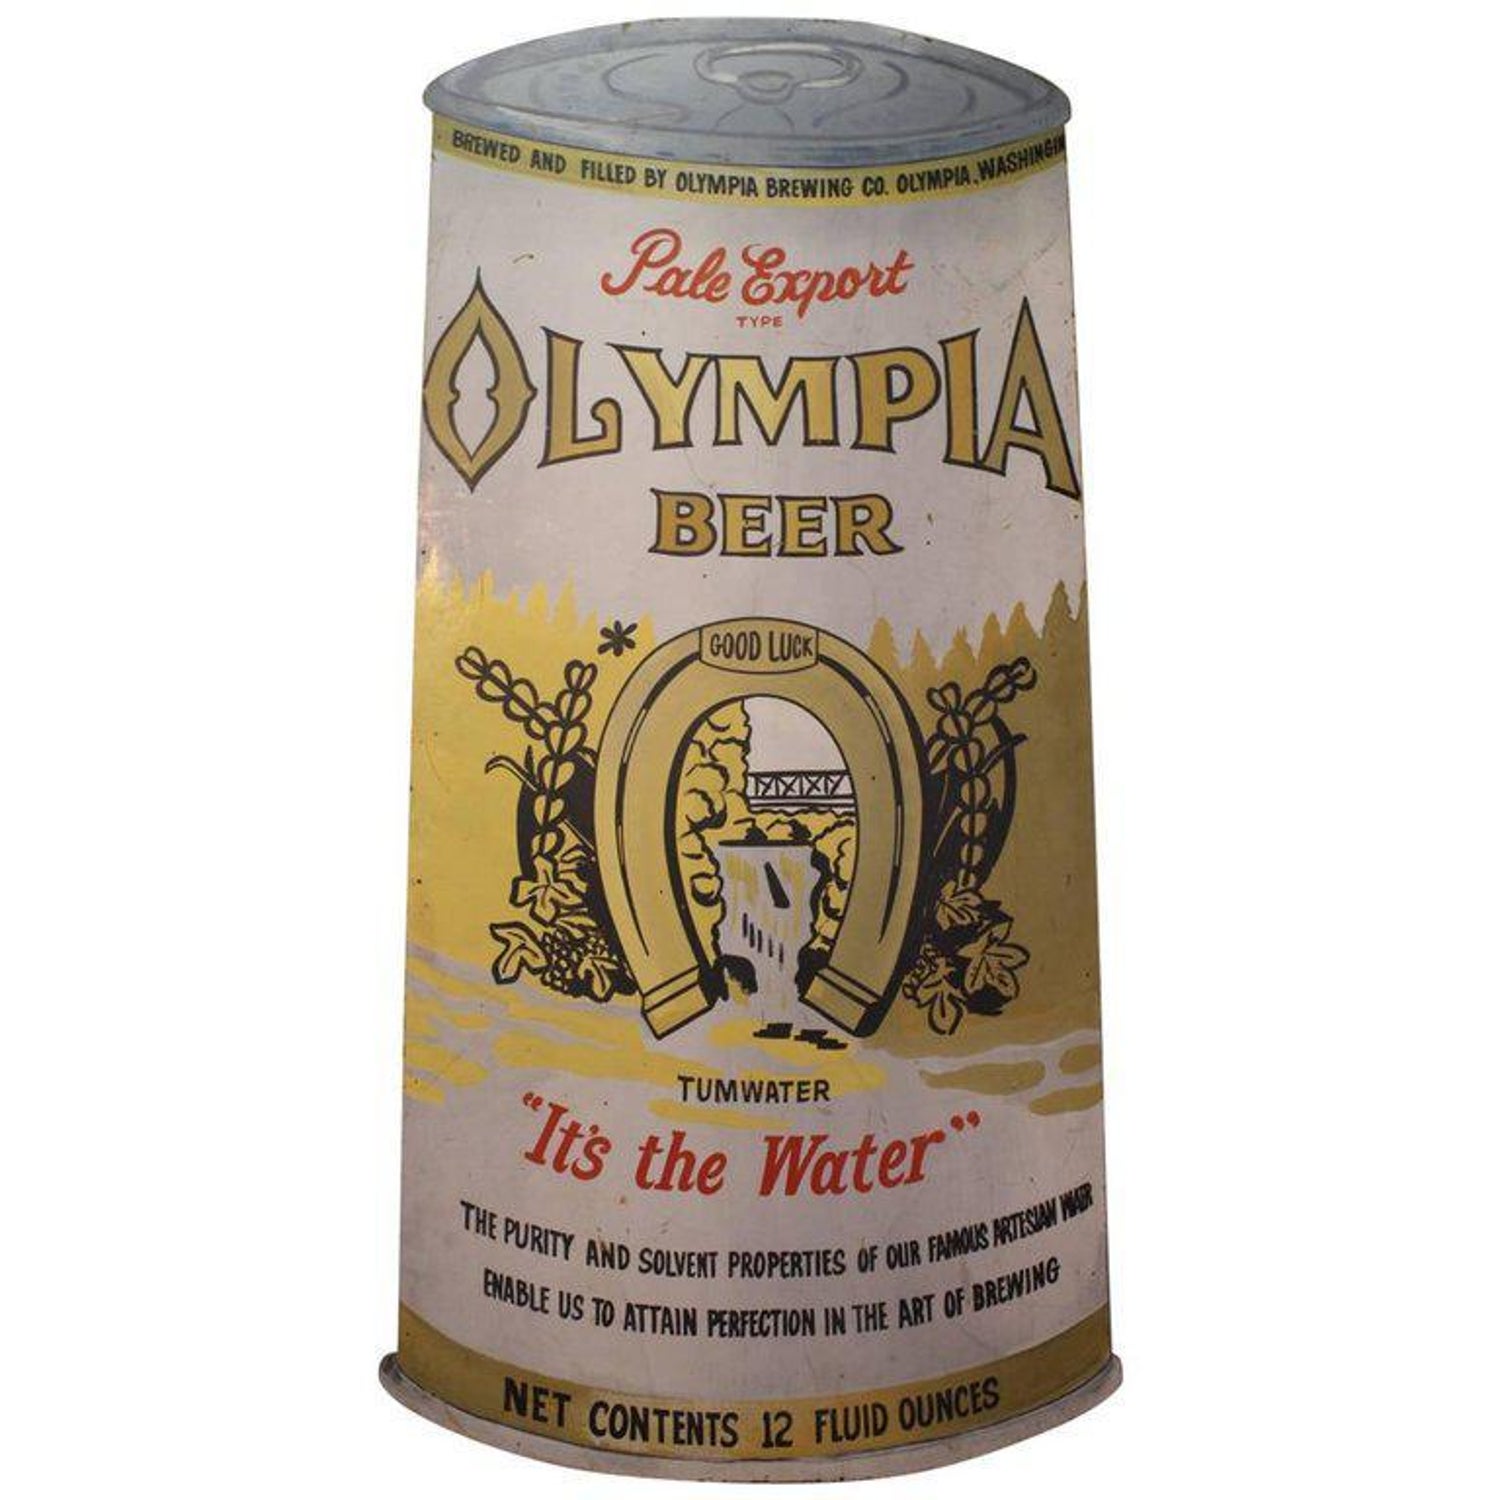 Olympia beer sign